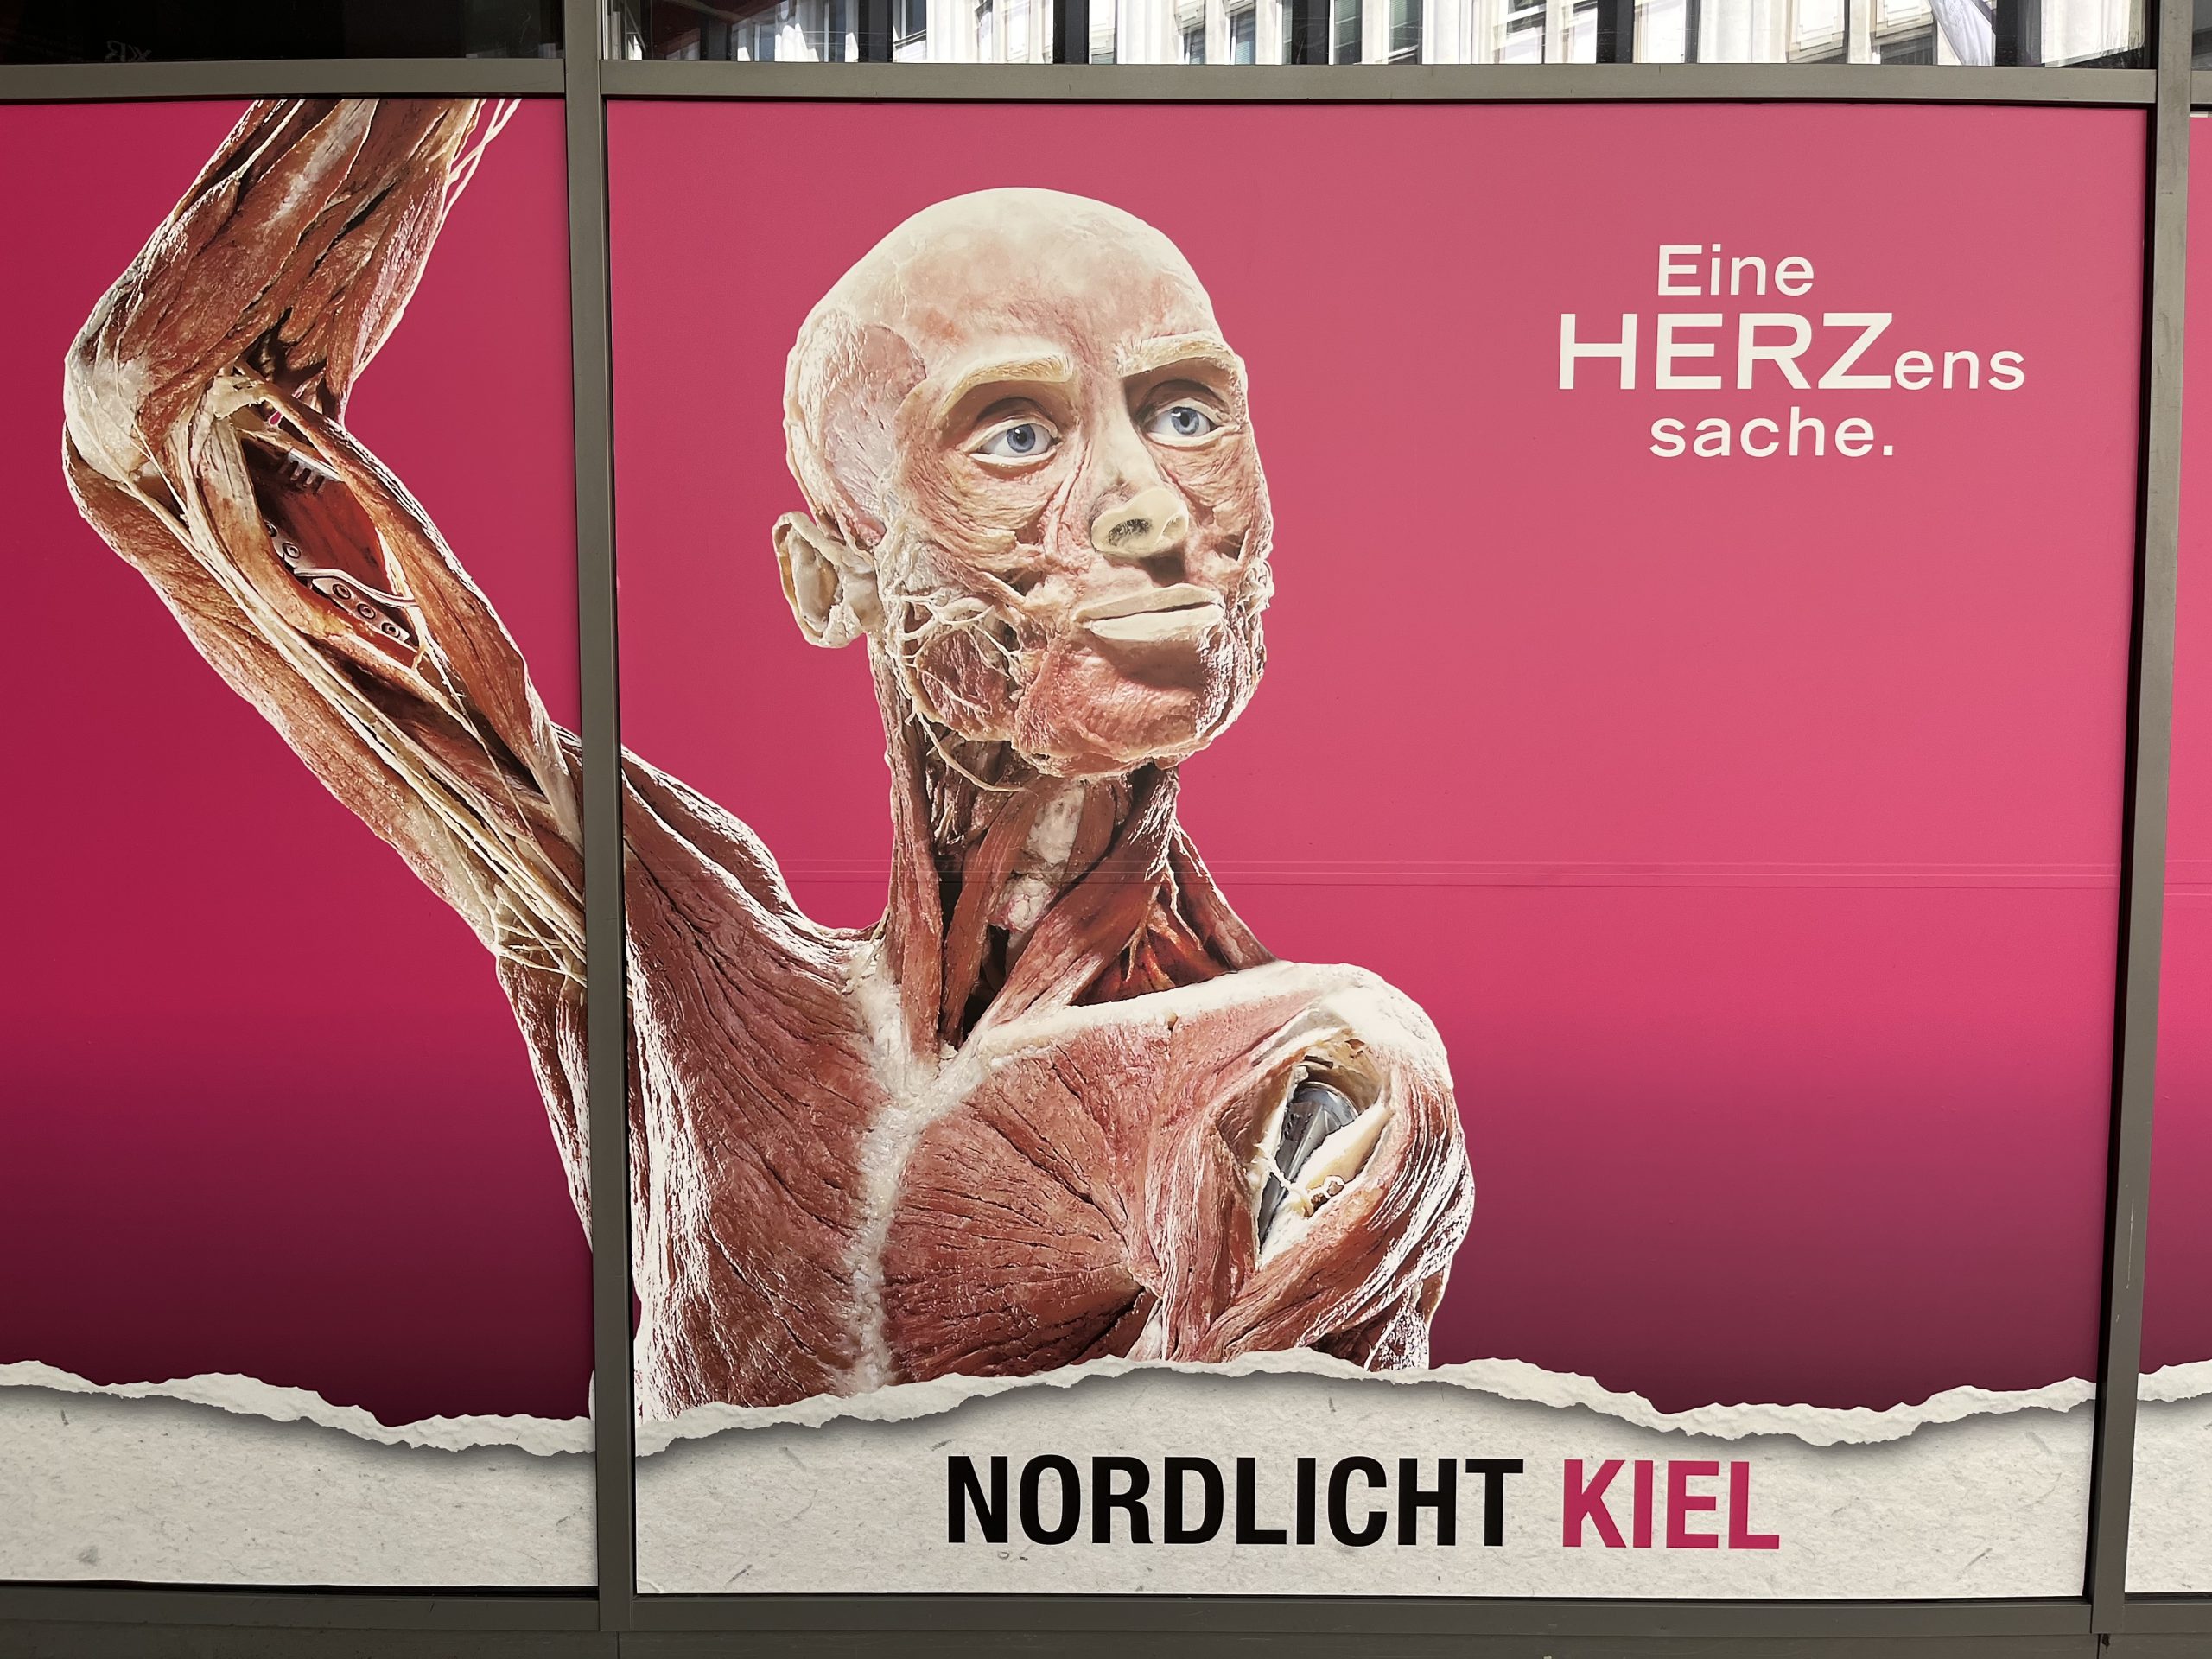 The “Body Worlds“ exhibition